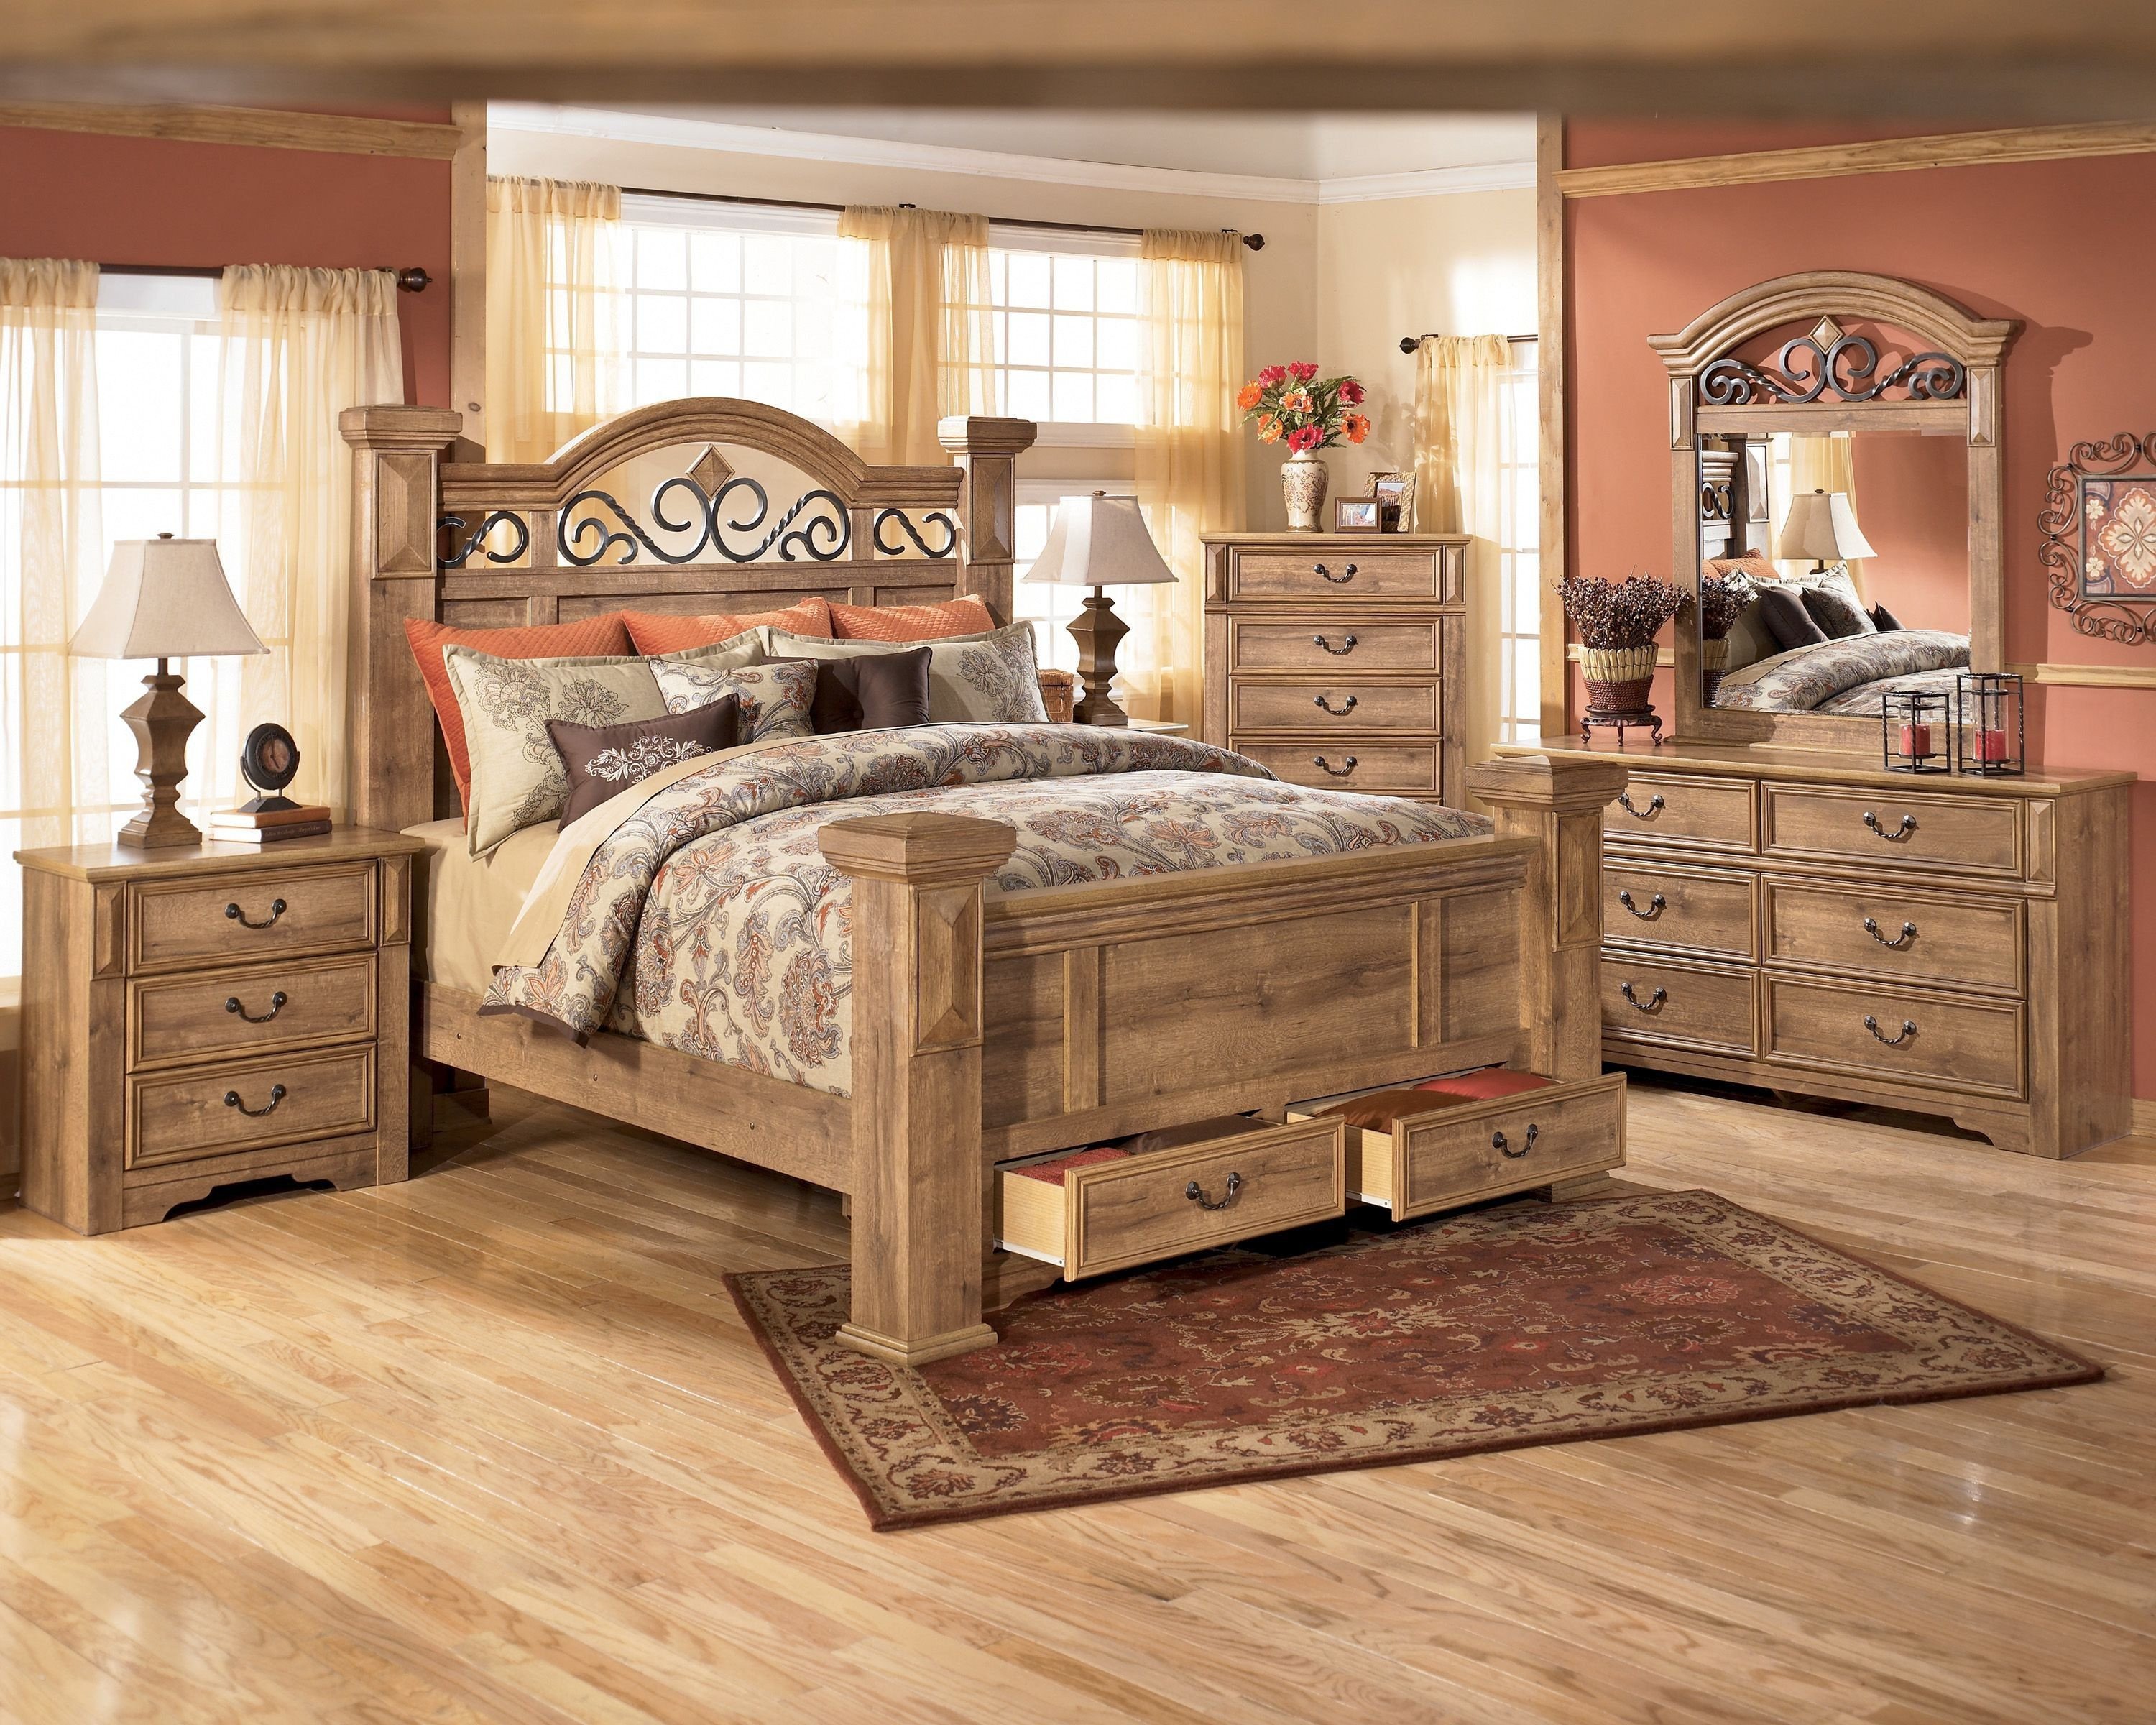 ashley bedroom furniture set discontinued in 2004